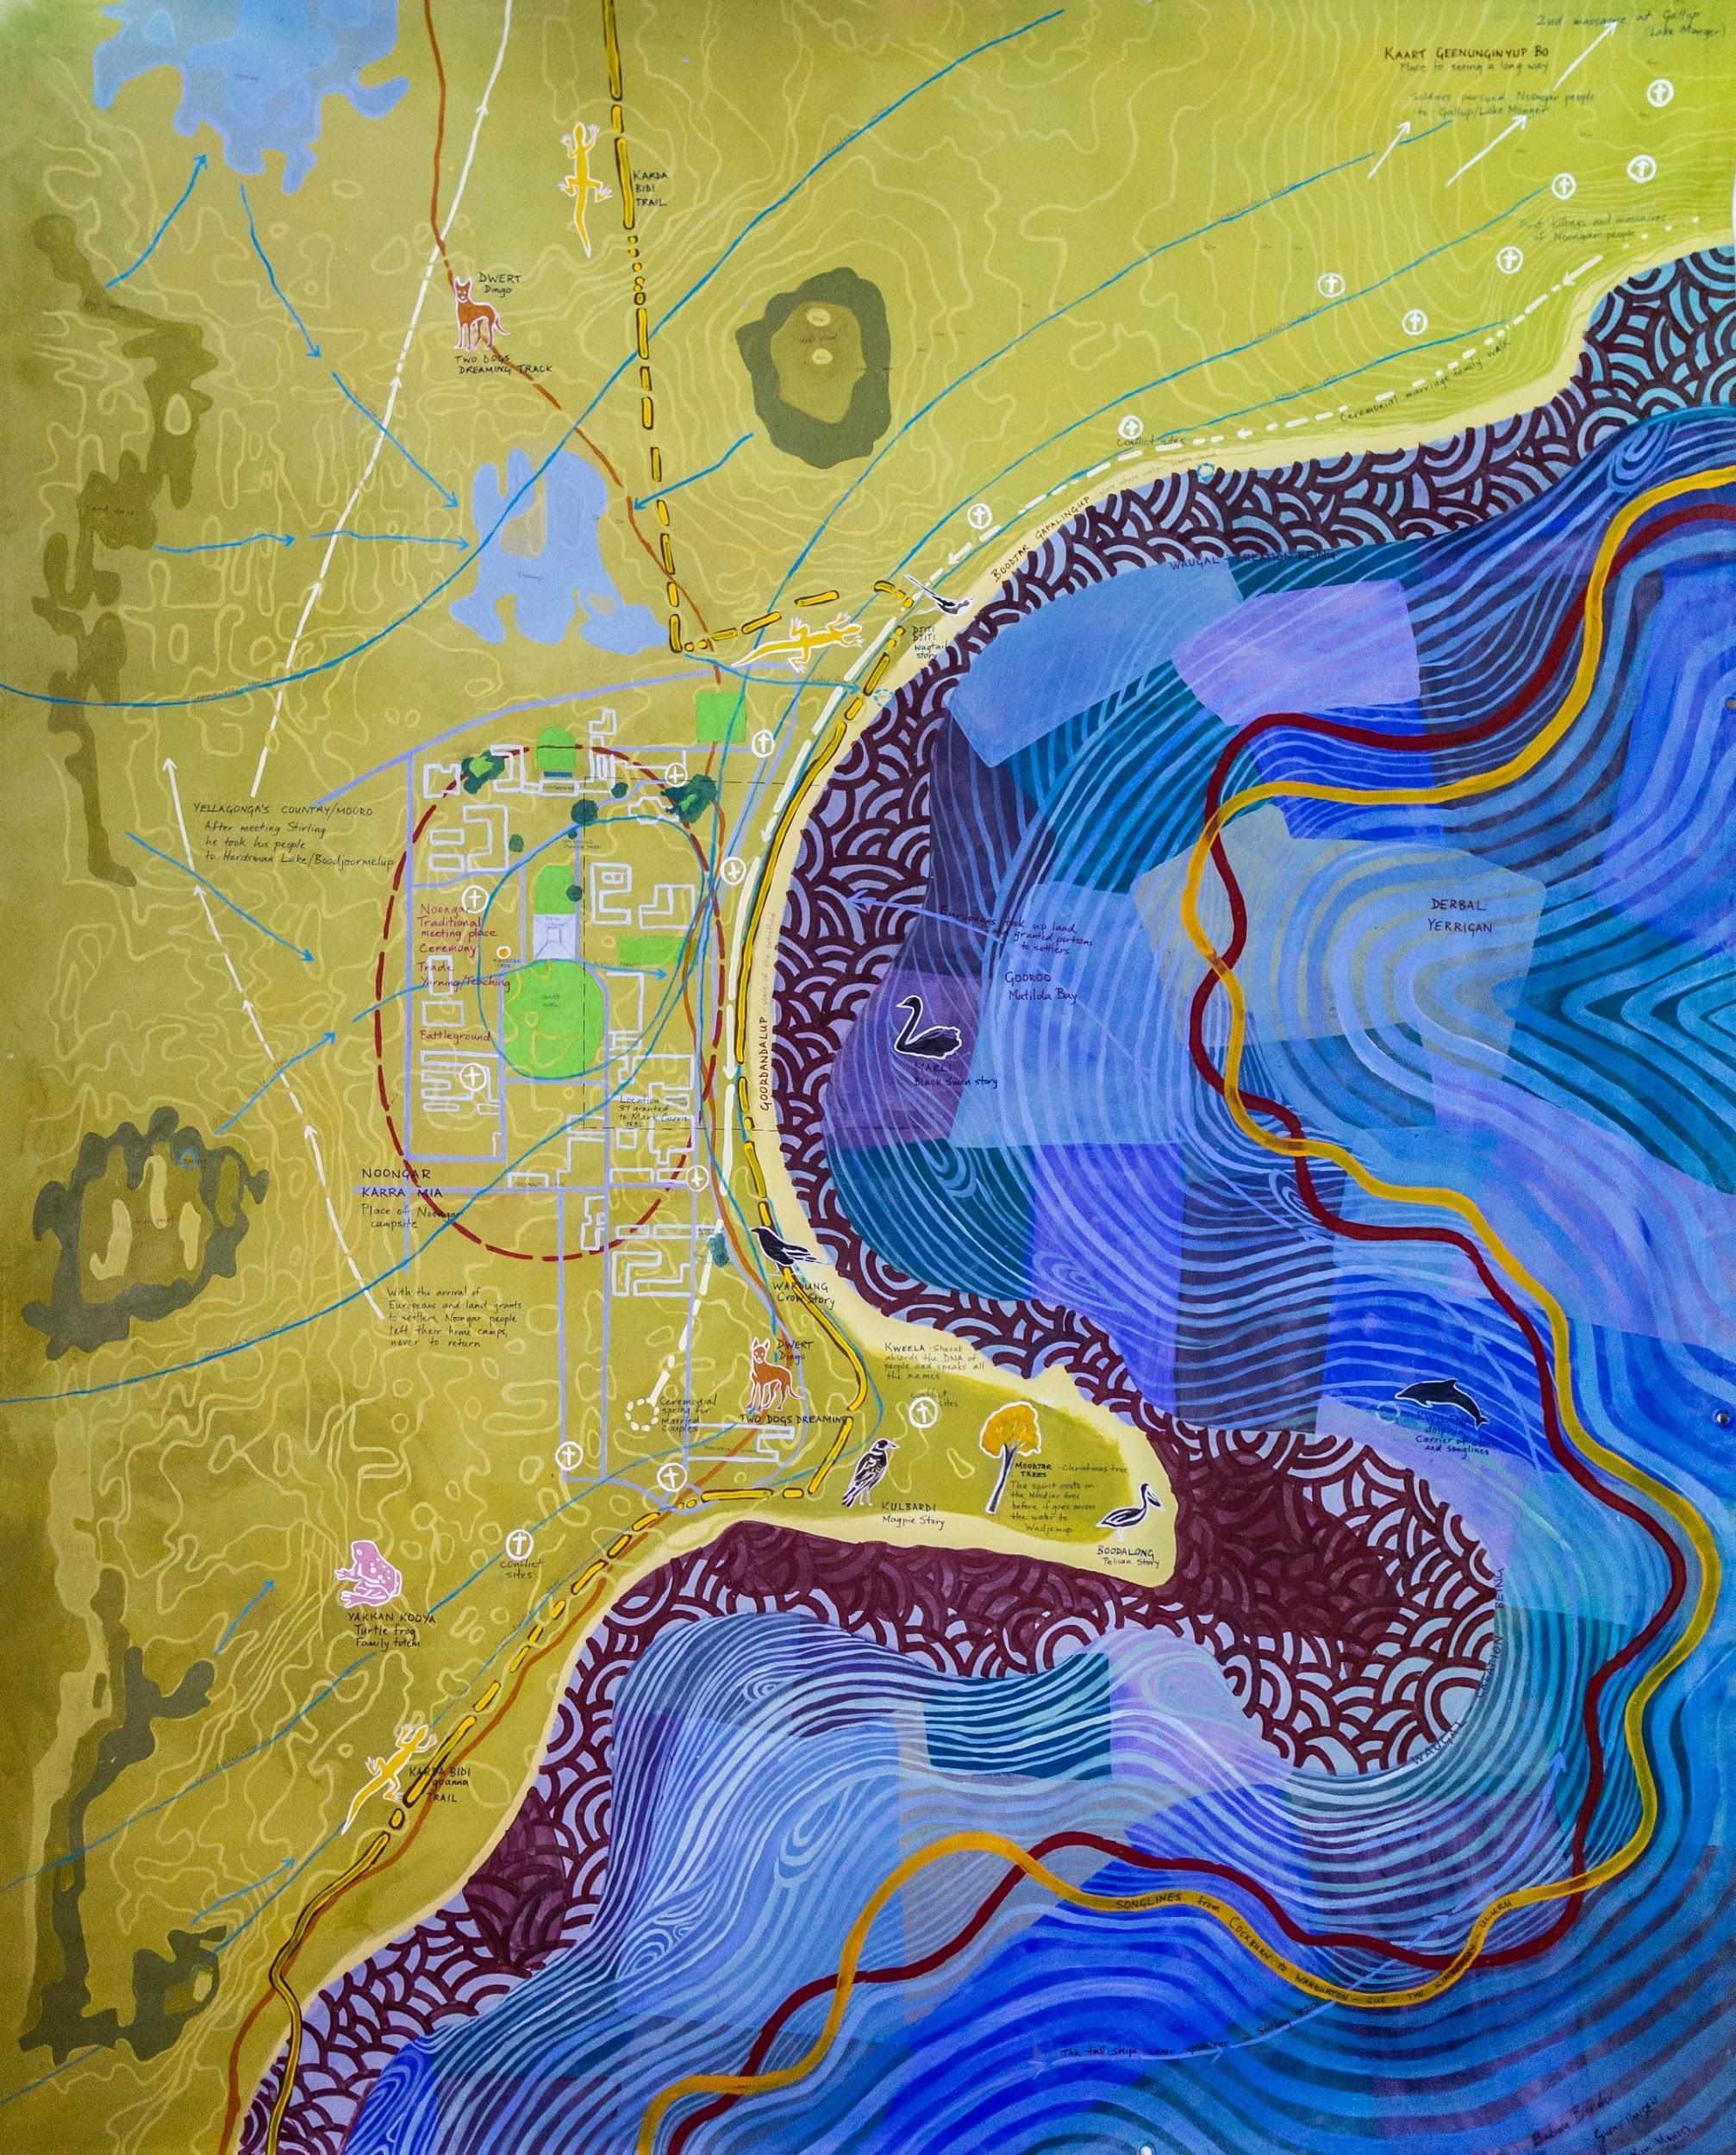 Image of the Univesity of Western Australia Cultural Map